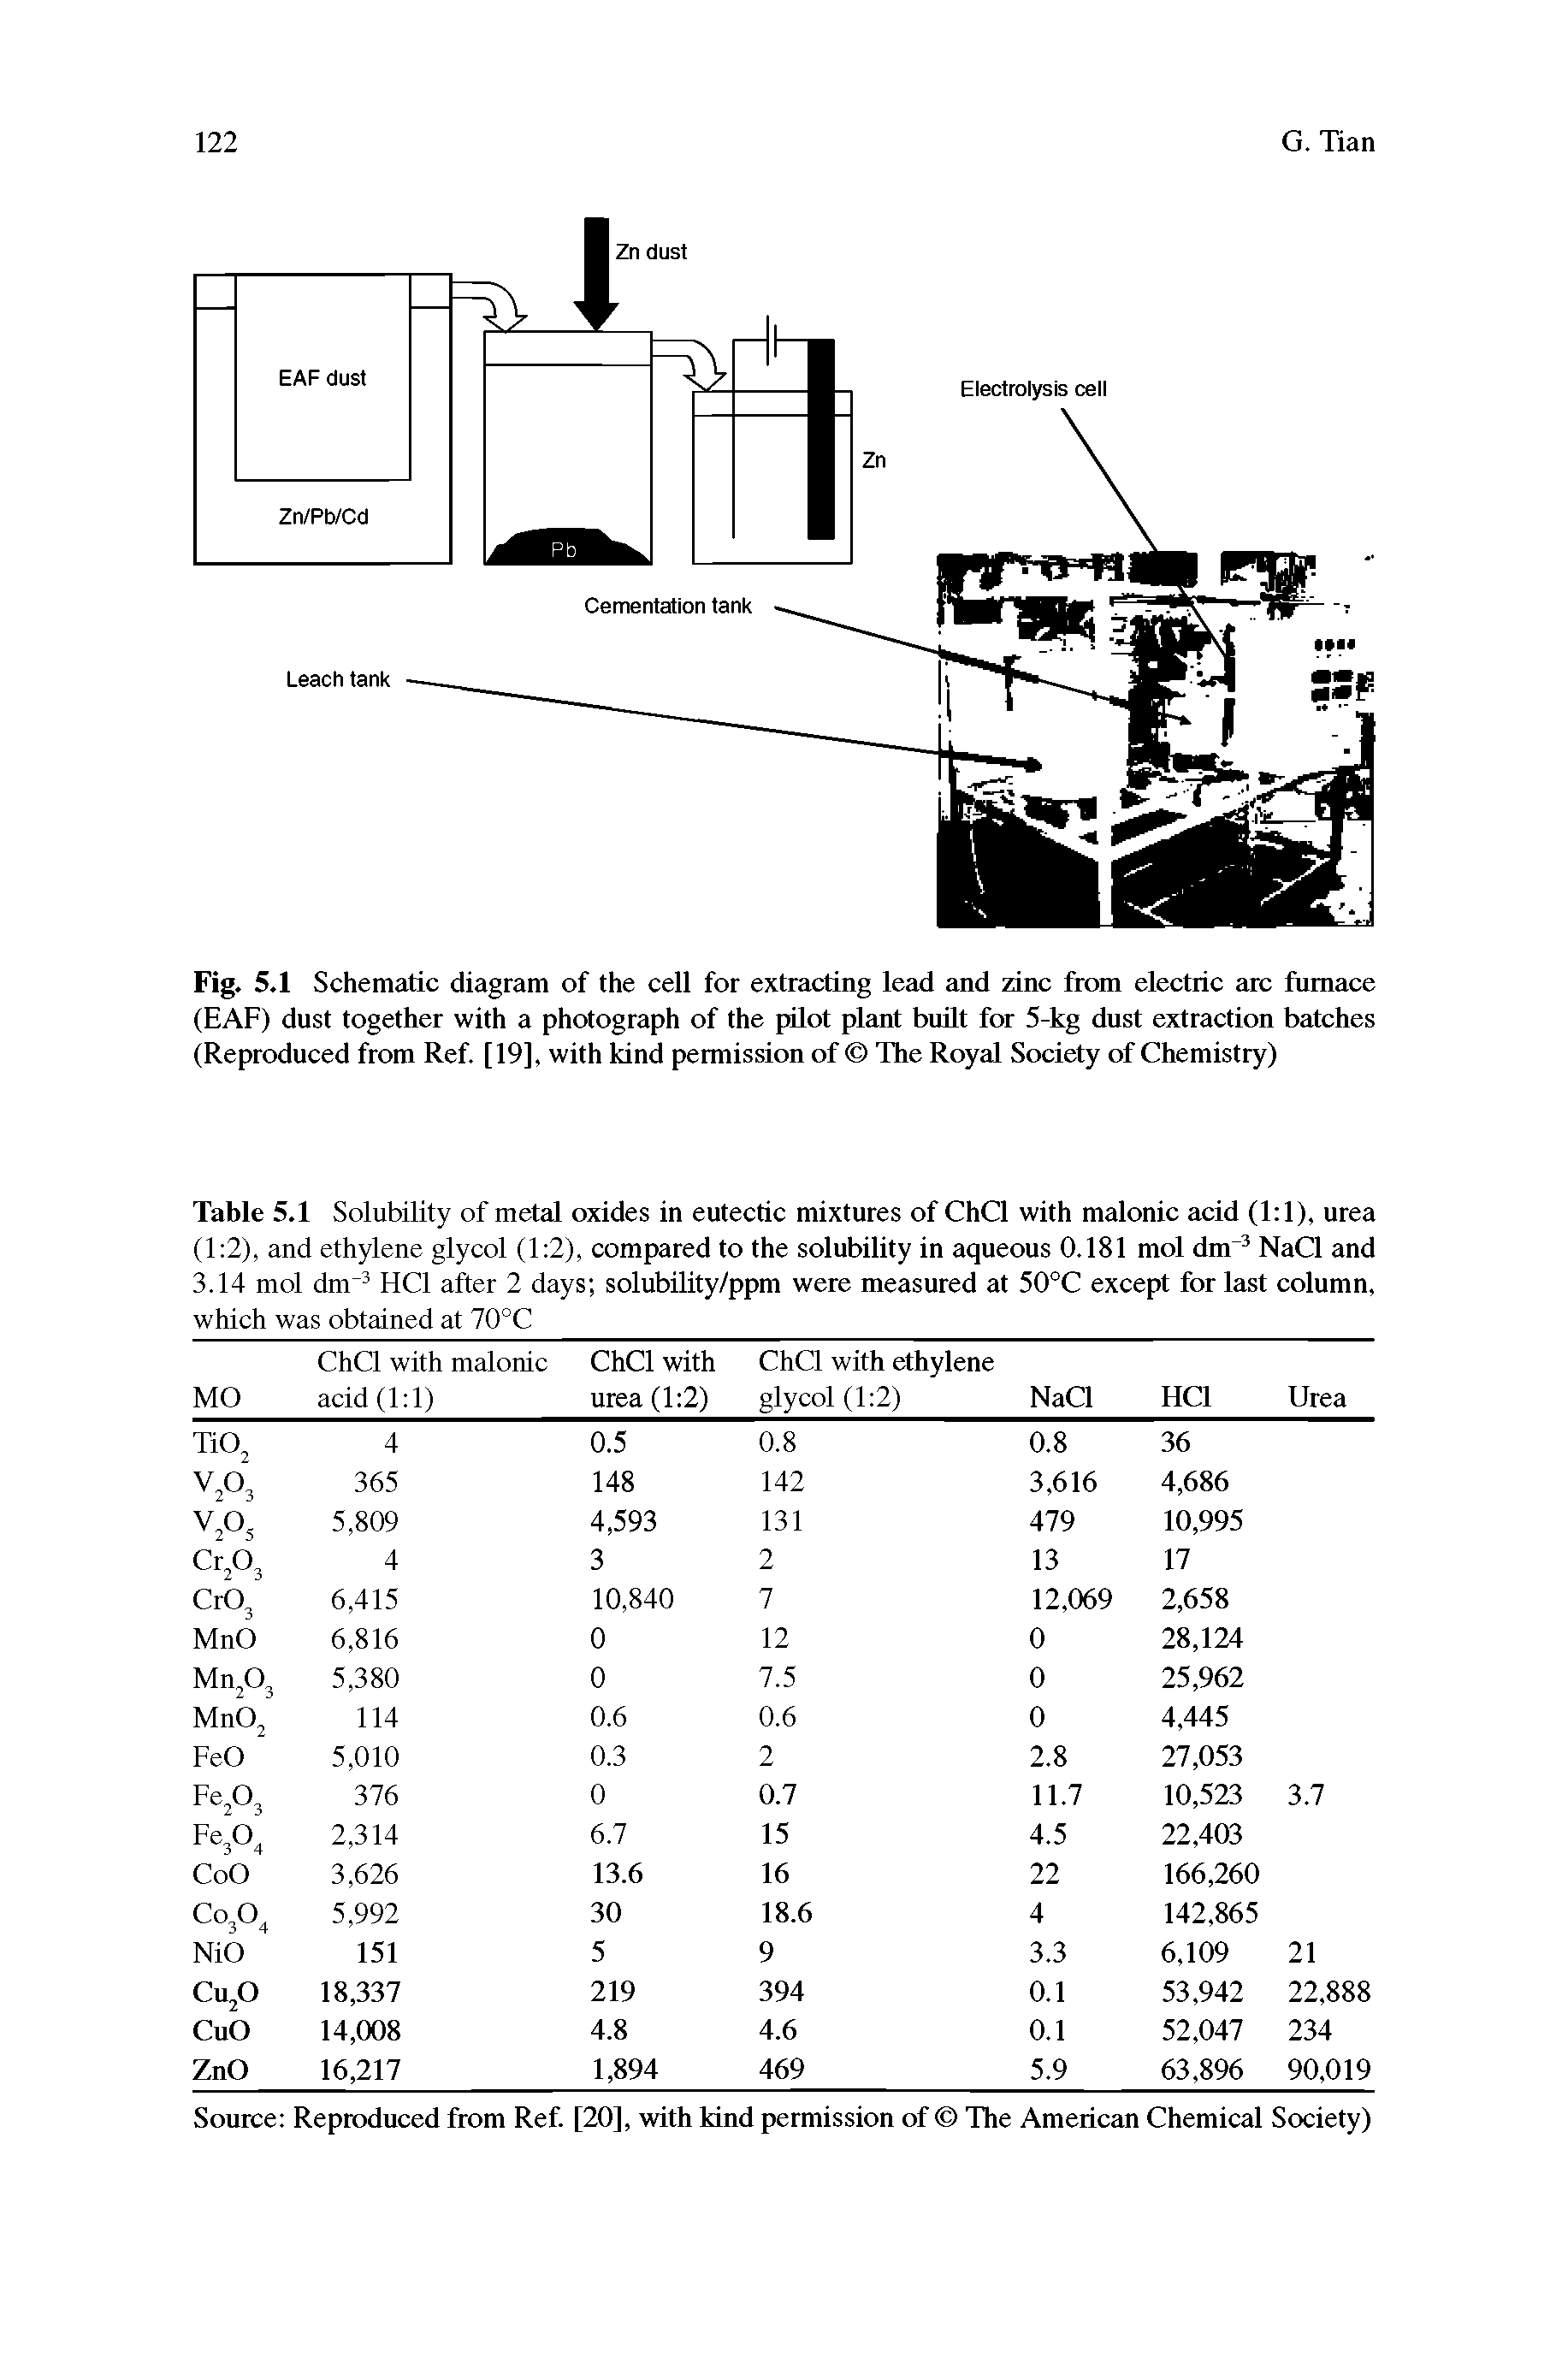 Fig. 5.1 Schematic diagram of the cell for extracting lead and zinc from electric arc furnace (EAF) dust together with a photograph of the pilot plant built for 5-kg dust extraction batches (Reproduced from Ref [19], with kind permission of The Royal Society of Chemistry)...